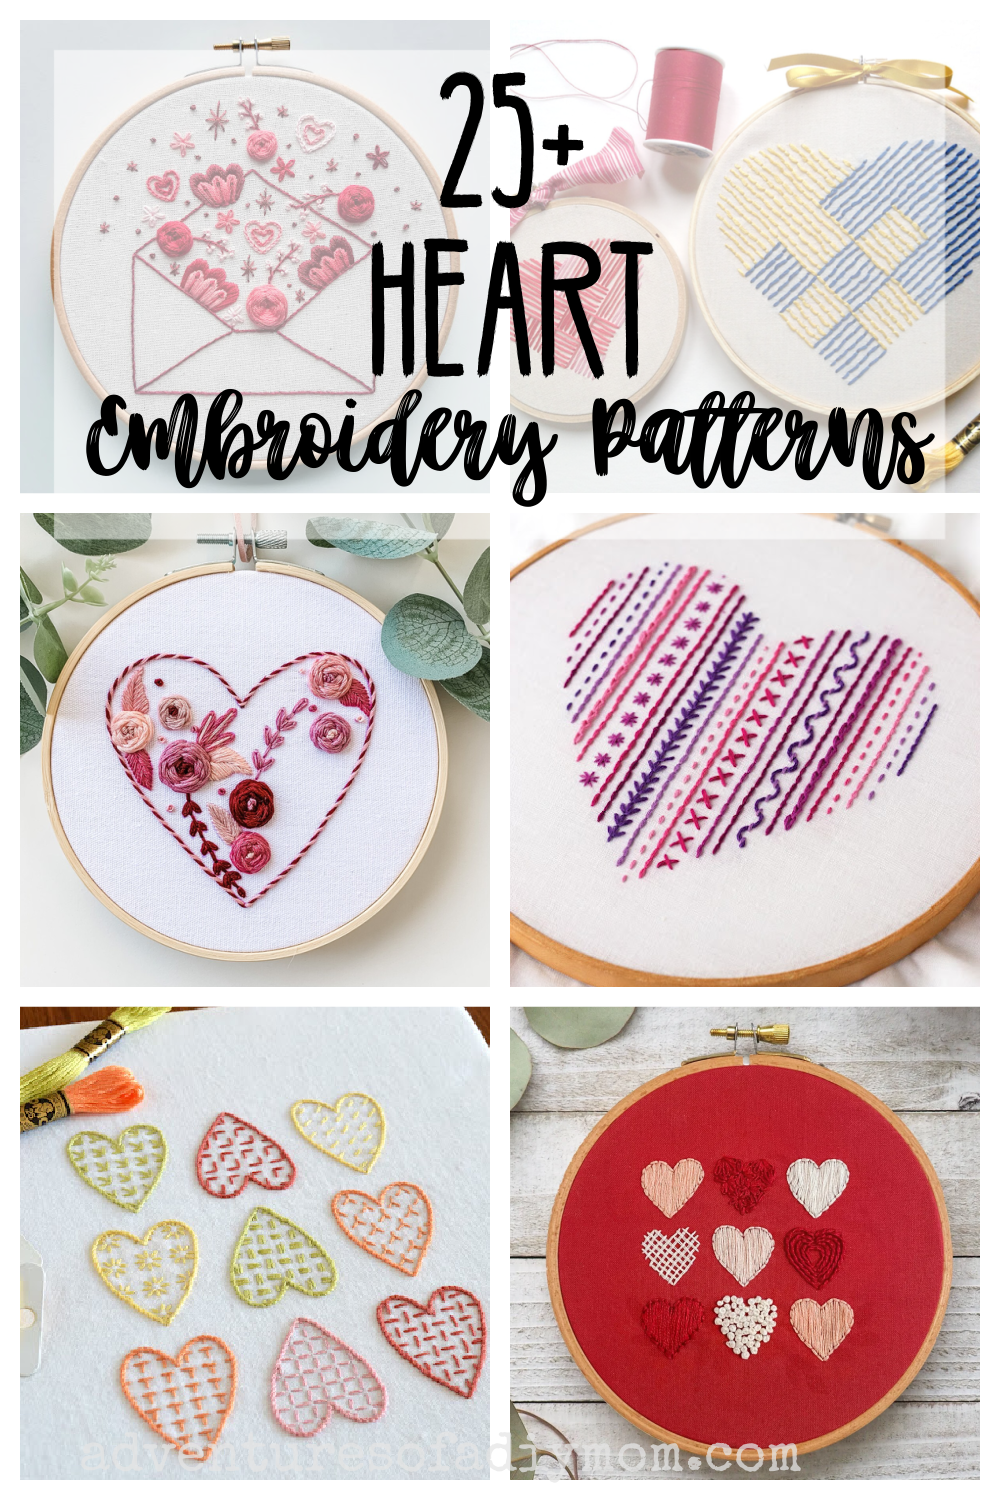 25+ Heart Embroidery Patterns (For Hand Embroidery) - Adventures